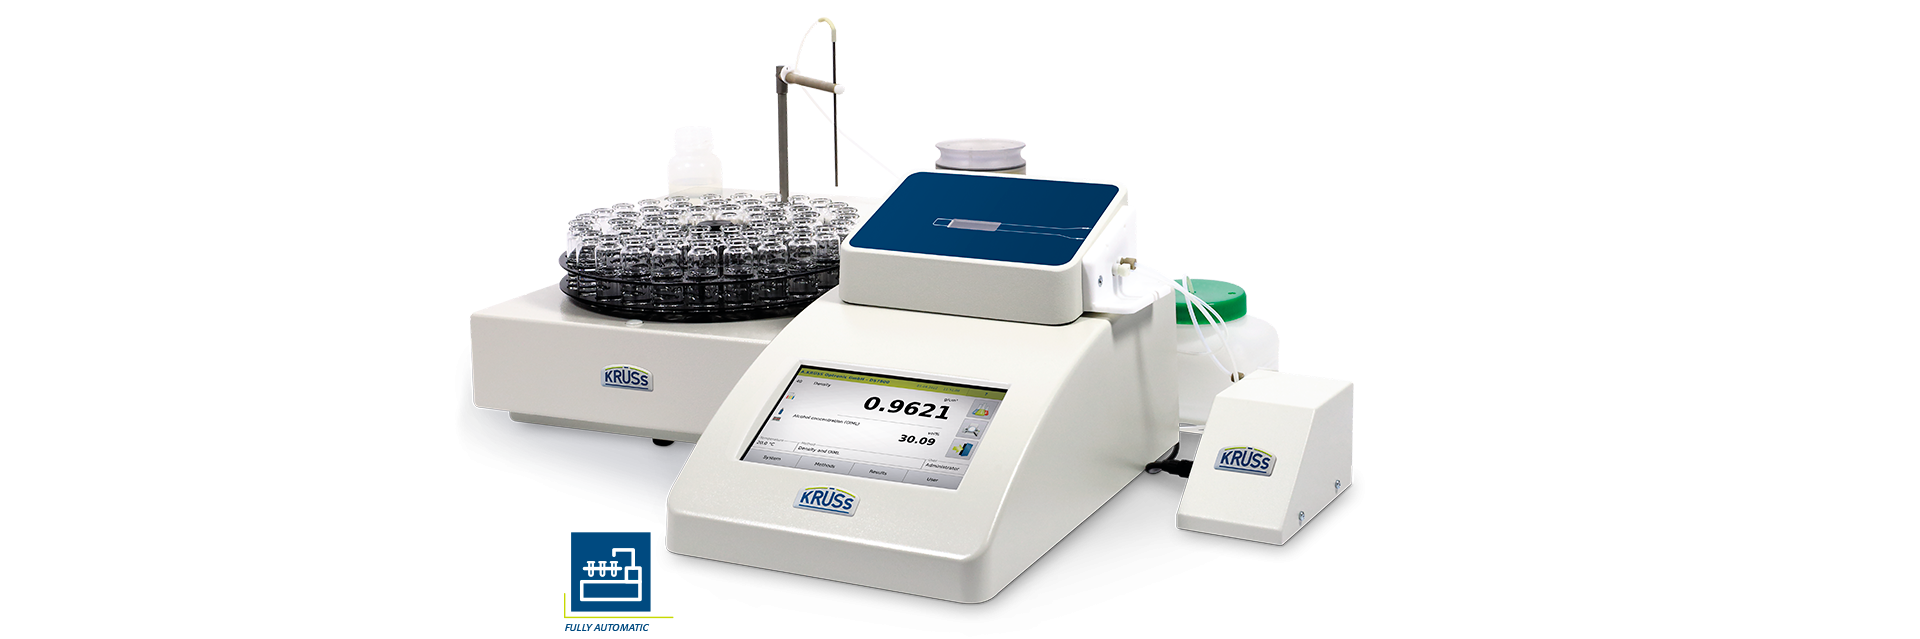 Density meter DS7800 with autosampler for fully automatic sample supply